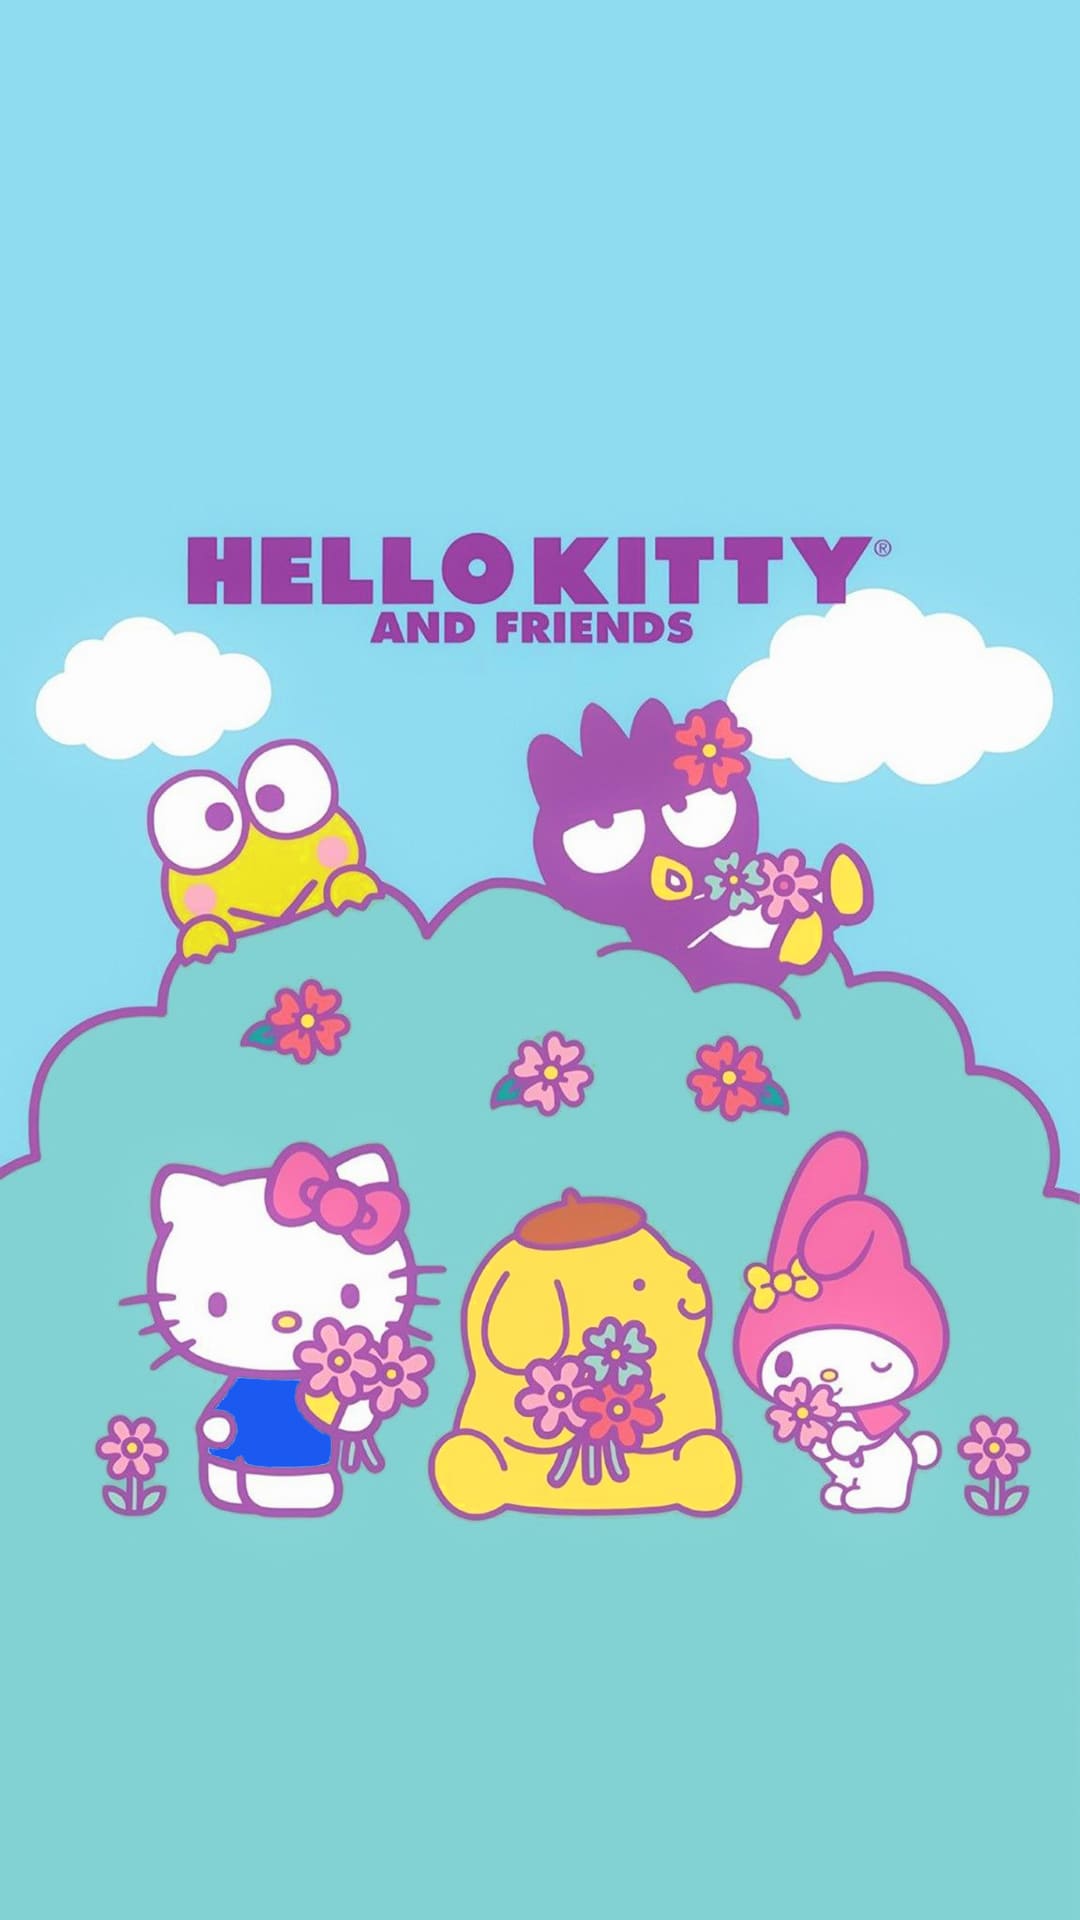 Hello Kitty on X Take a road trip with Hello Kitty and friends to  celebrate Mountain Day in Hello Kitty and Friends Supercute Adventures on  the HelloKittyandFriends YouTube channel Watch now  httpstcoOEPgx7txyp